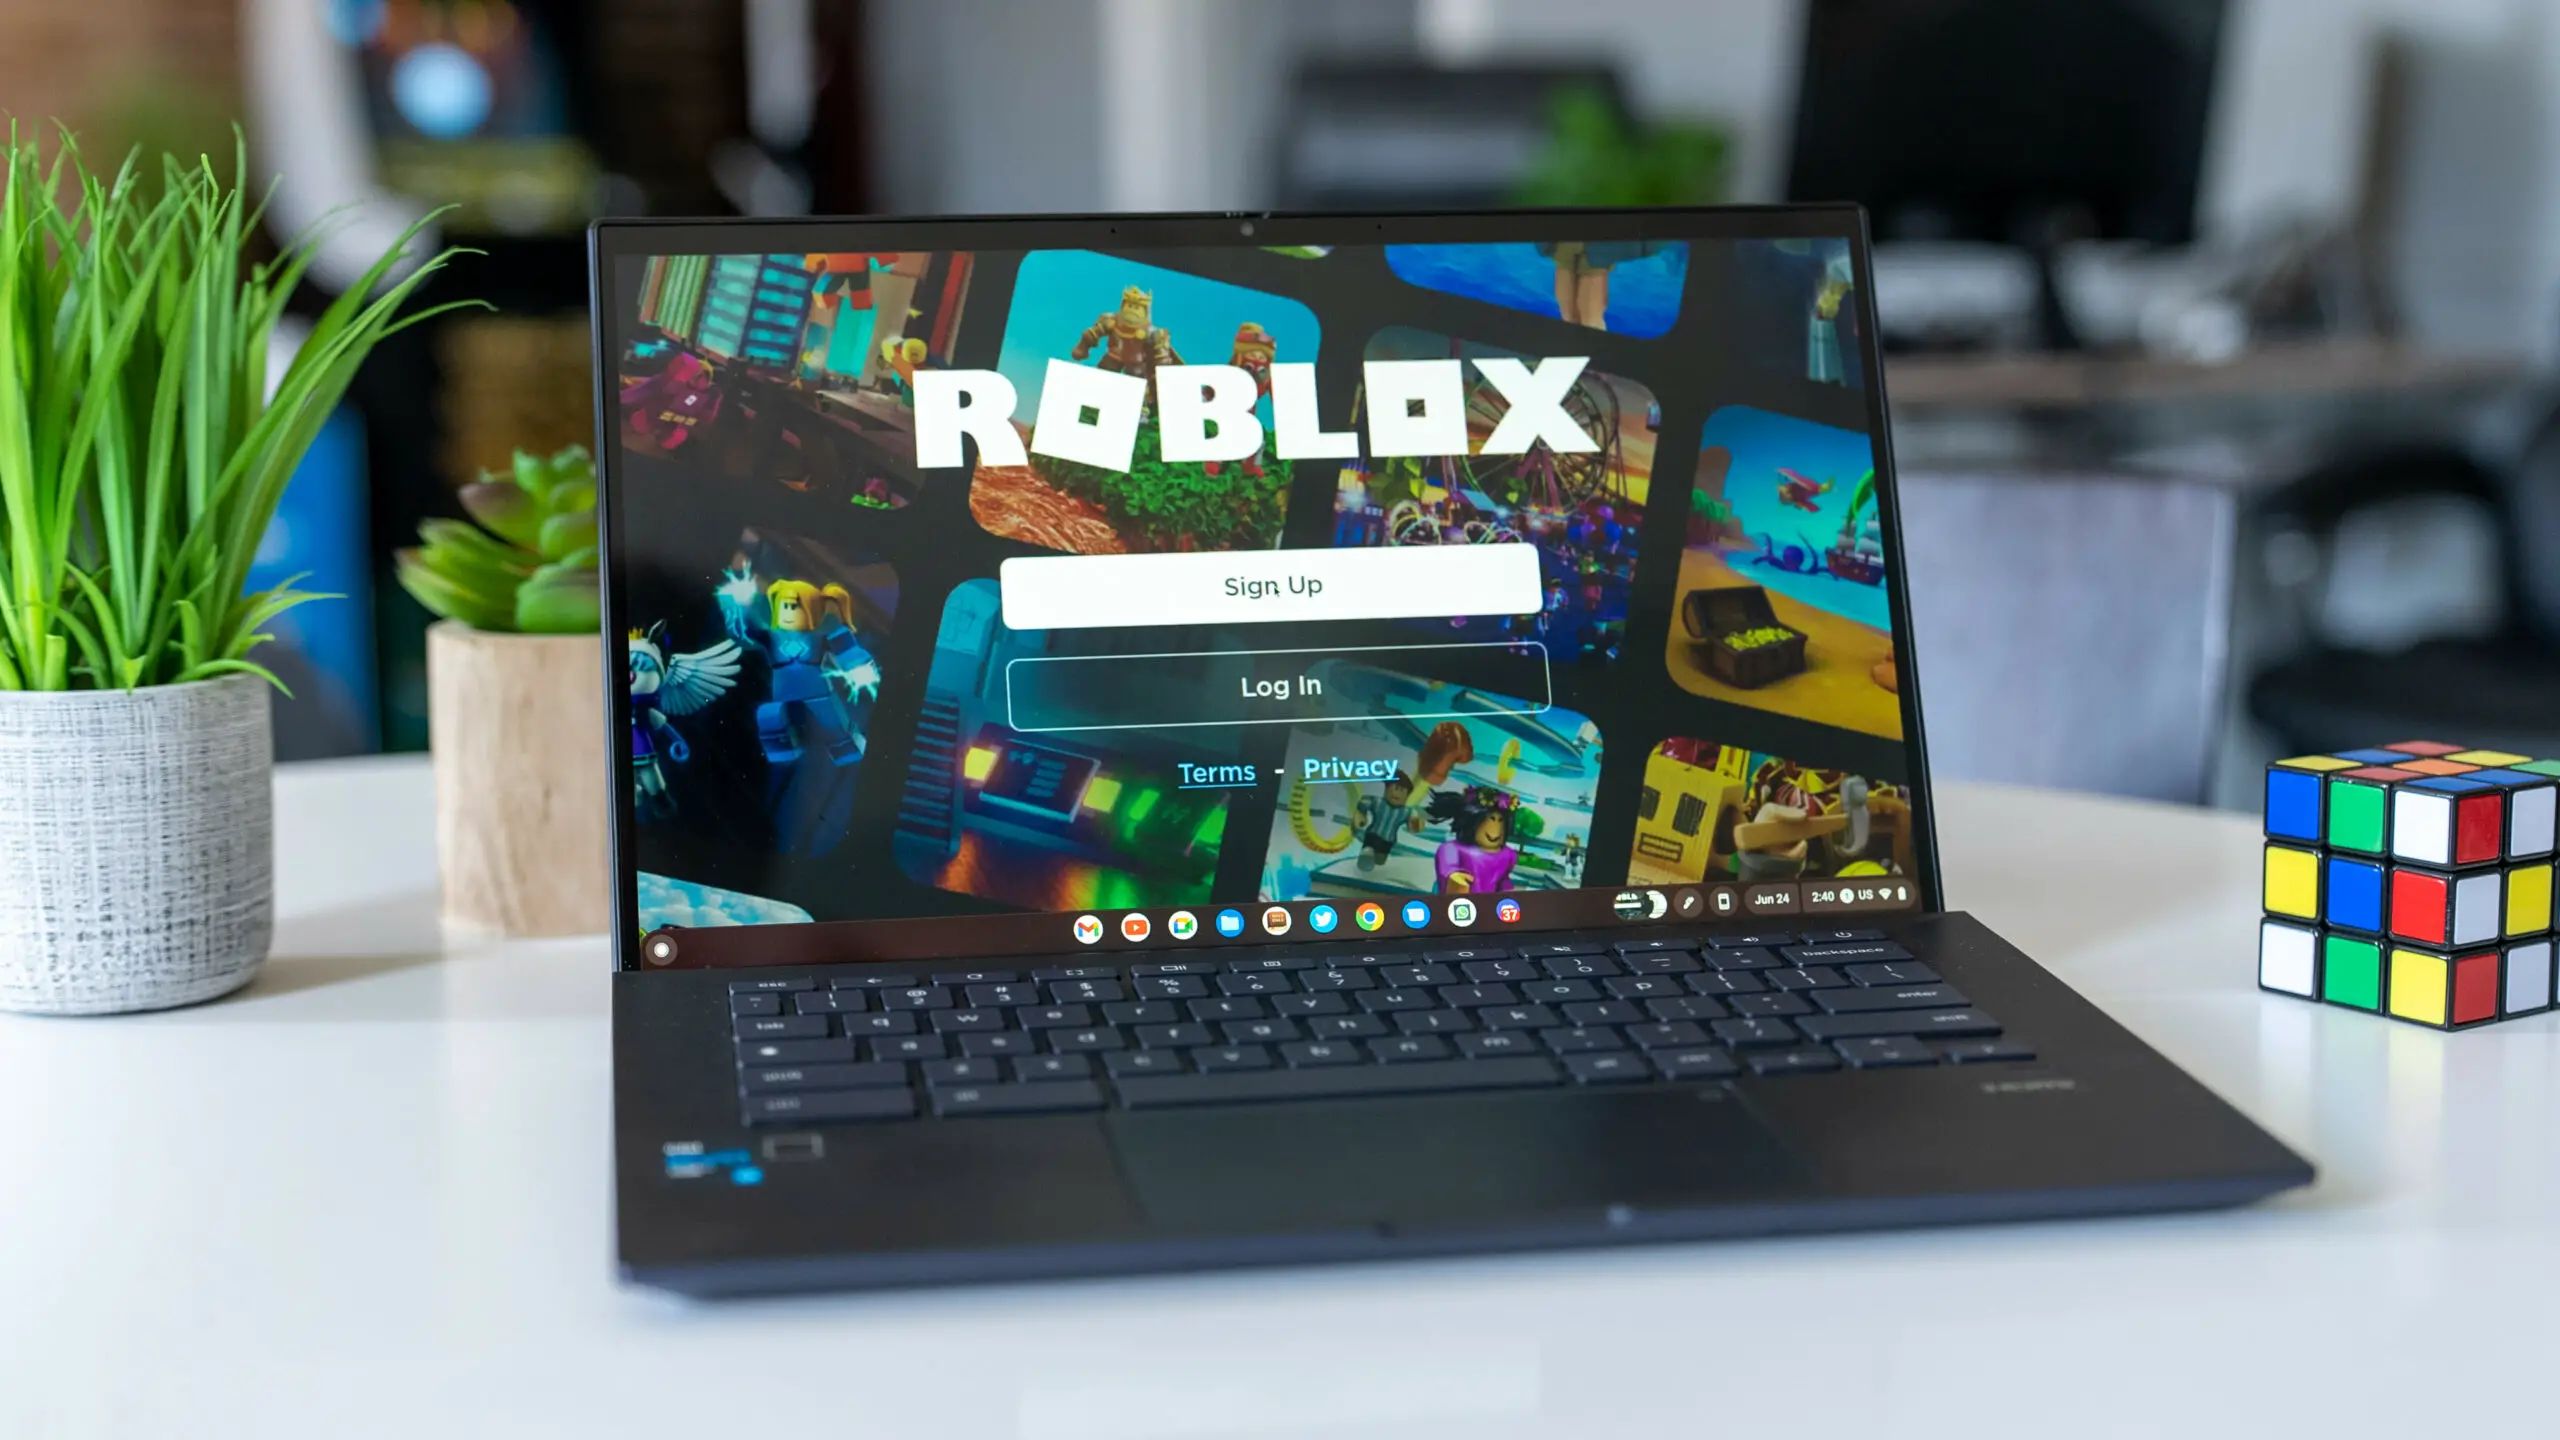 How To Get Roblox On Chrome